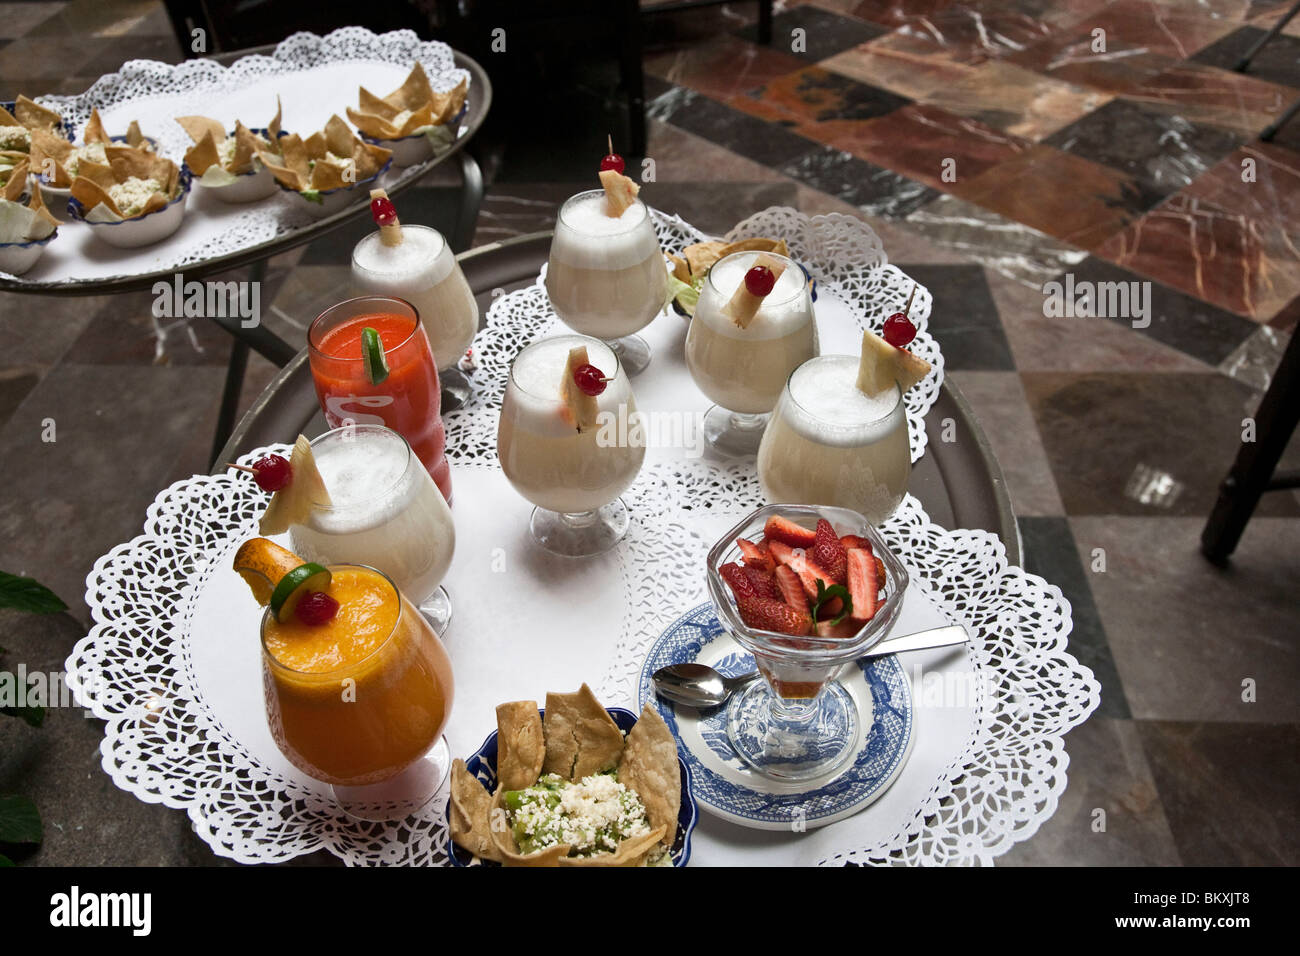 tray of delicious starter non-alcoholic drinks & appetizers to tempt diners at Sanborns House of Tiles restaurant in Mexico City Stock Photo